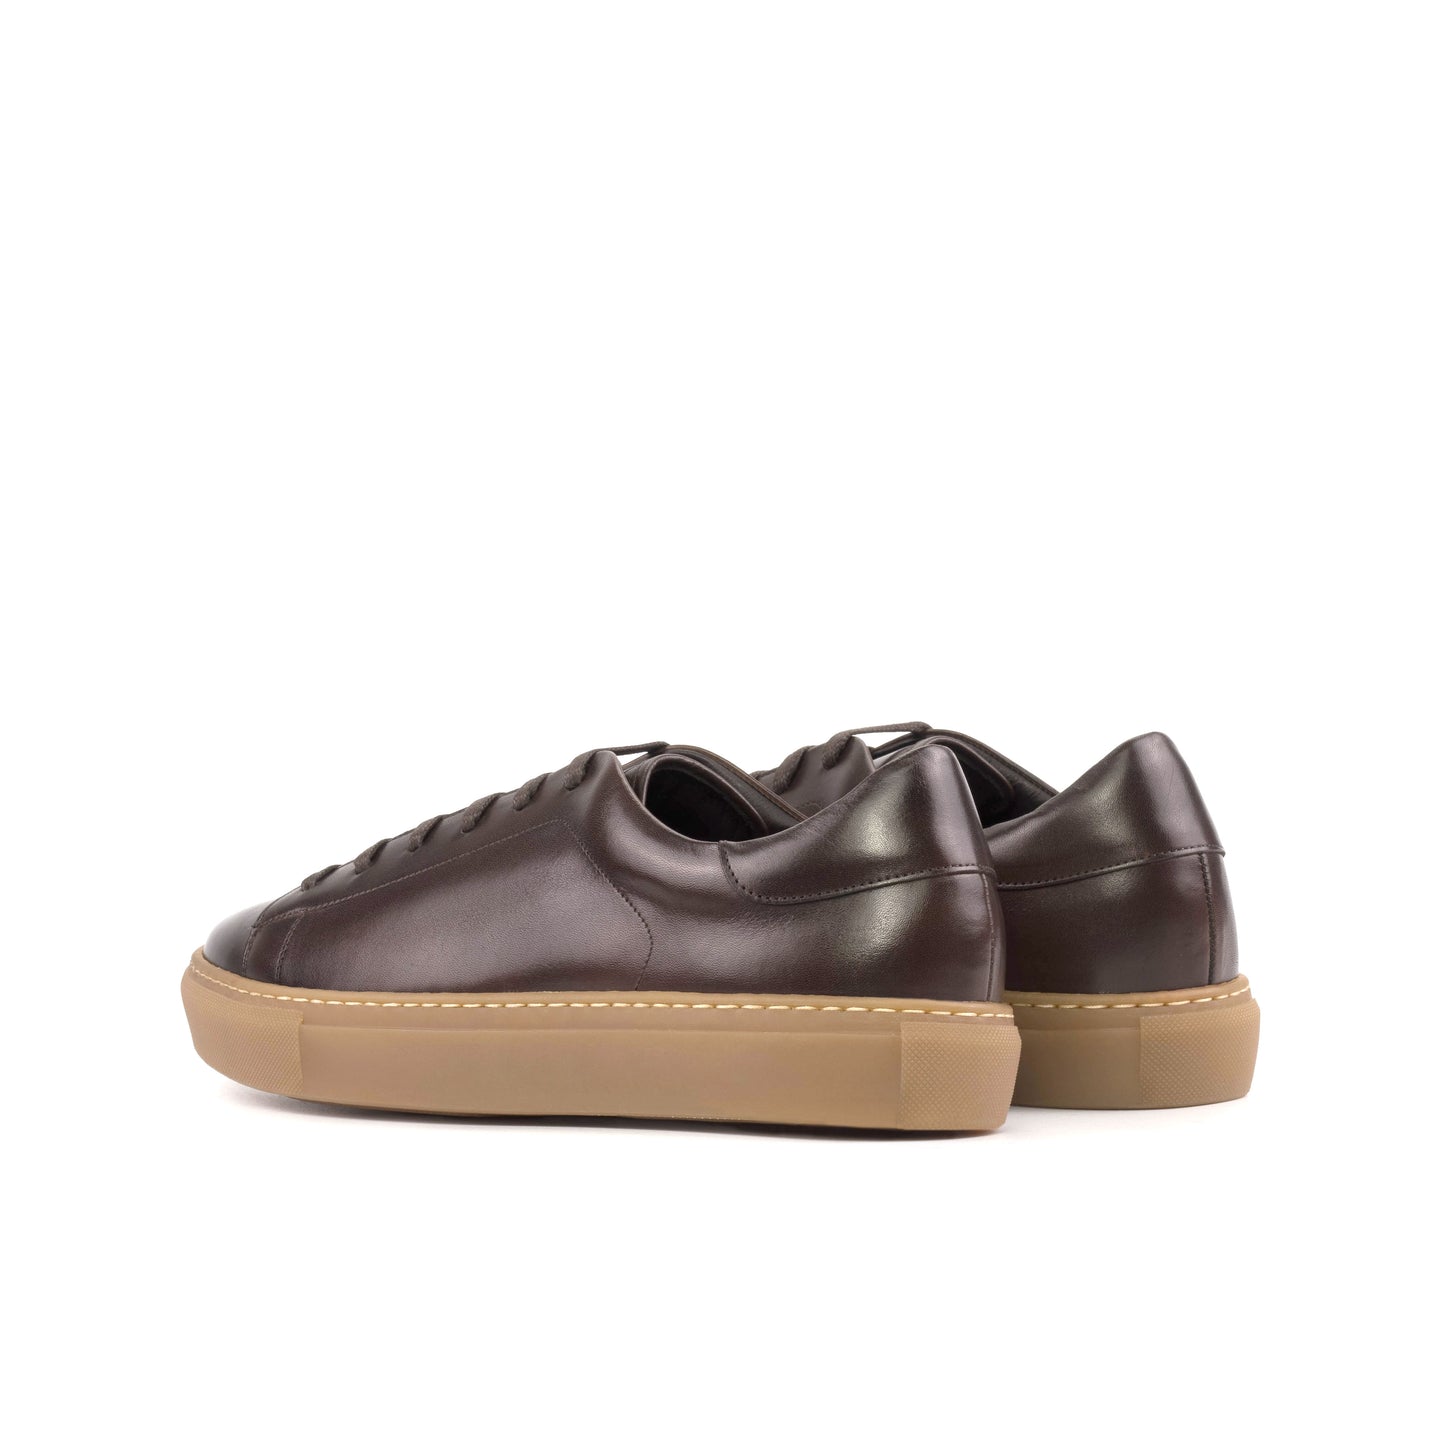 SUITCAFE Classic Sneaker Brown Leather Caramel Cupsole Ships in 7 Days